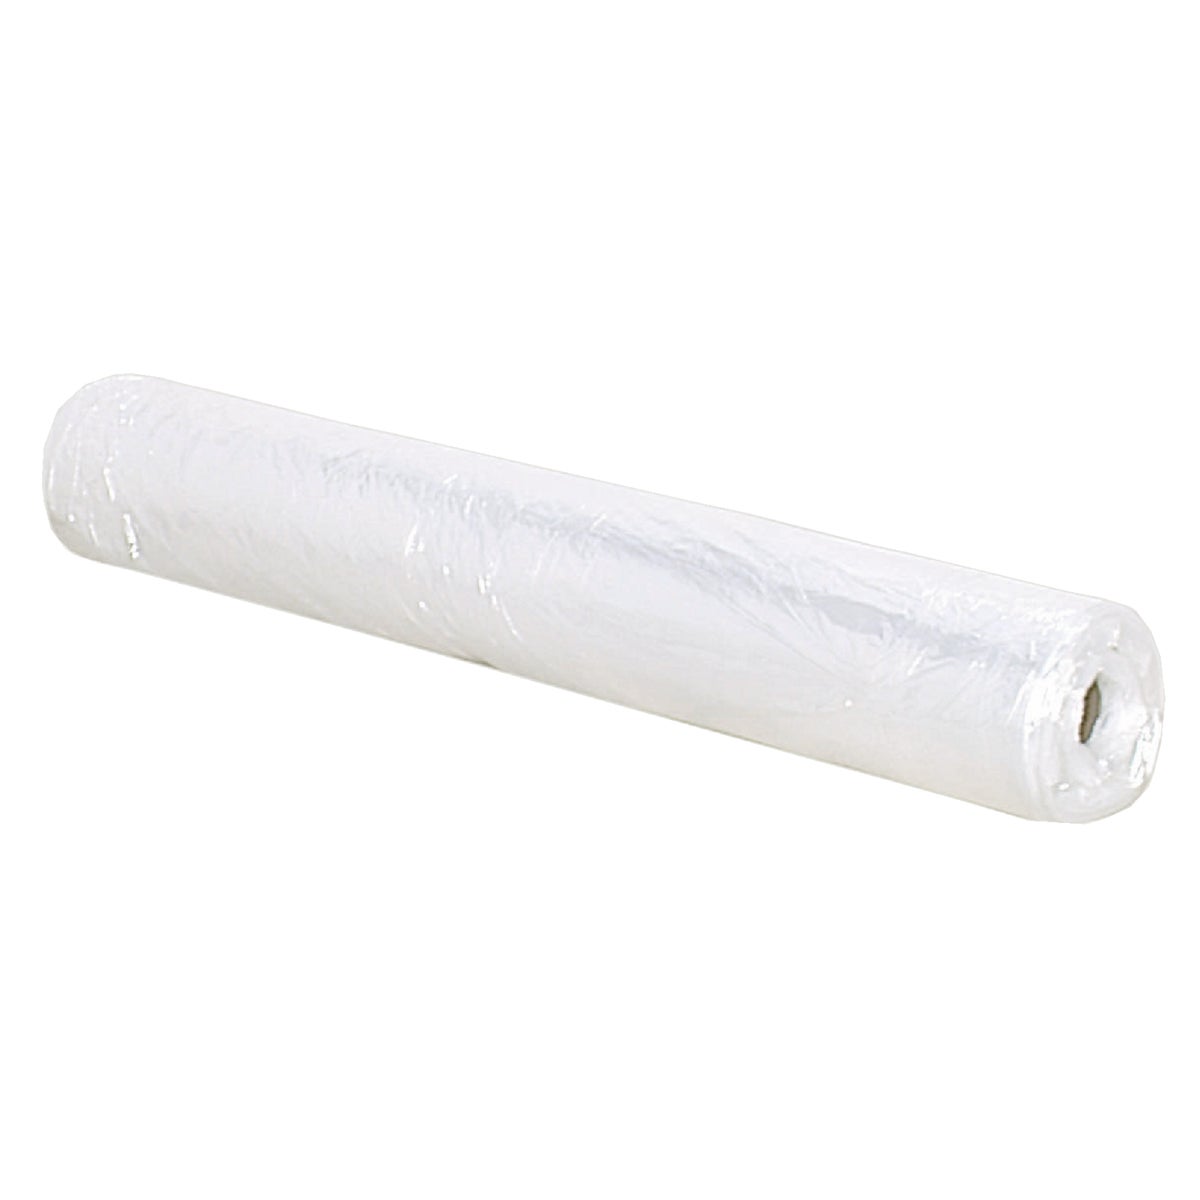 Item 774488, Low-density plastic sheeting designed specifically for the professional or 